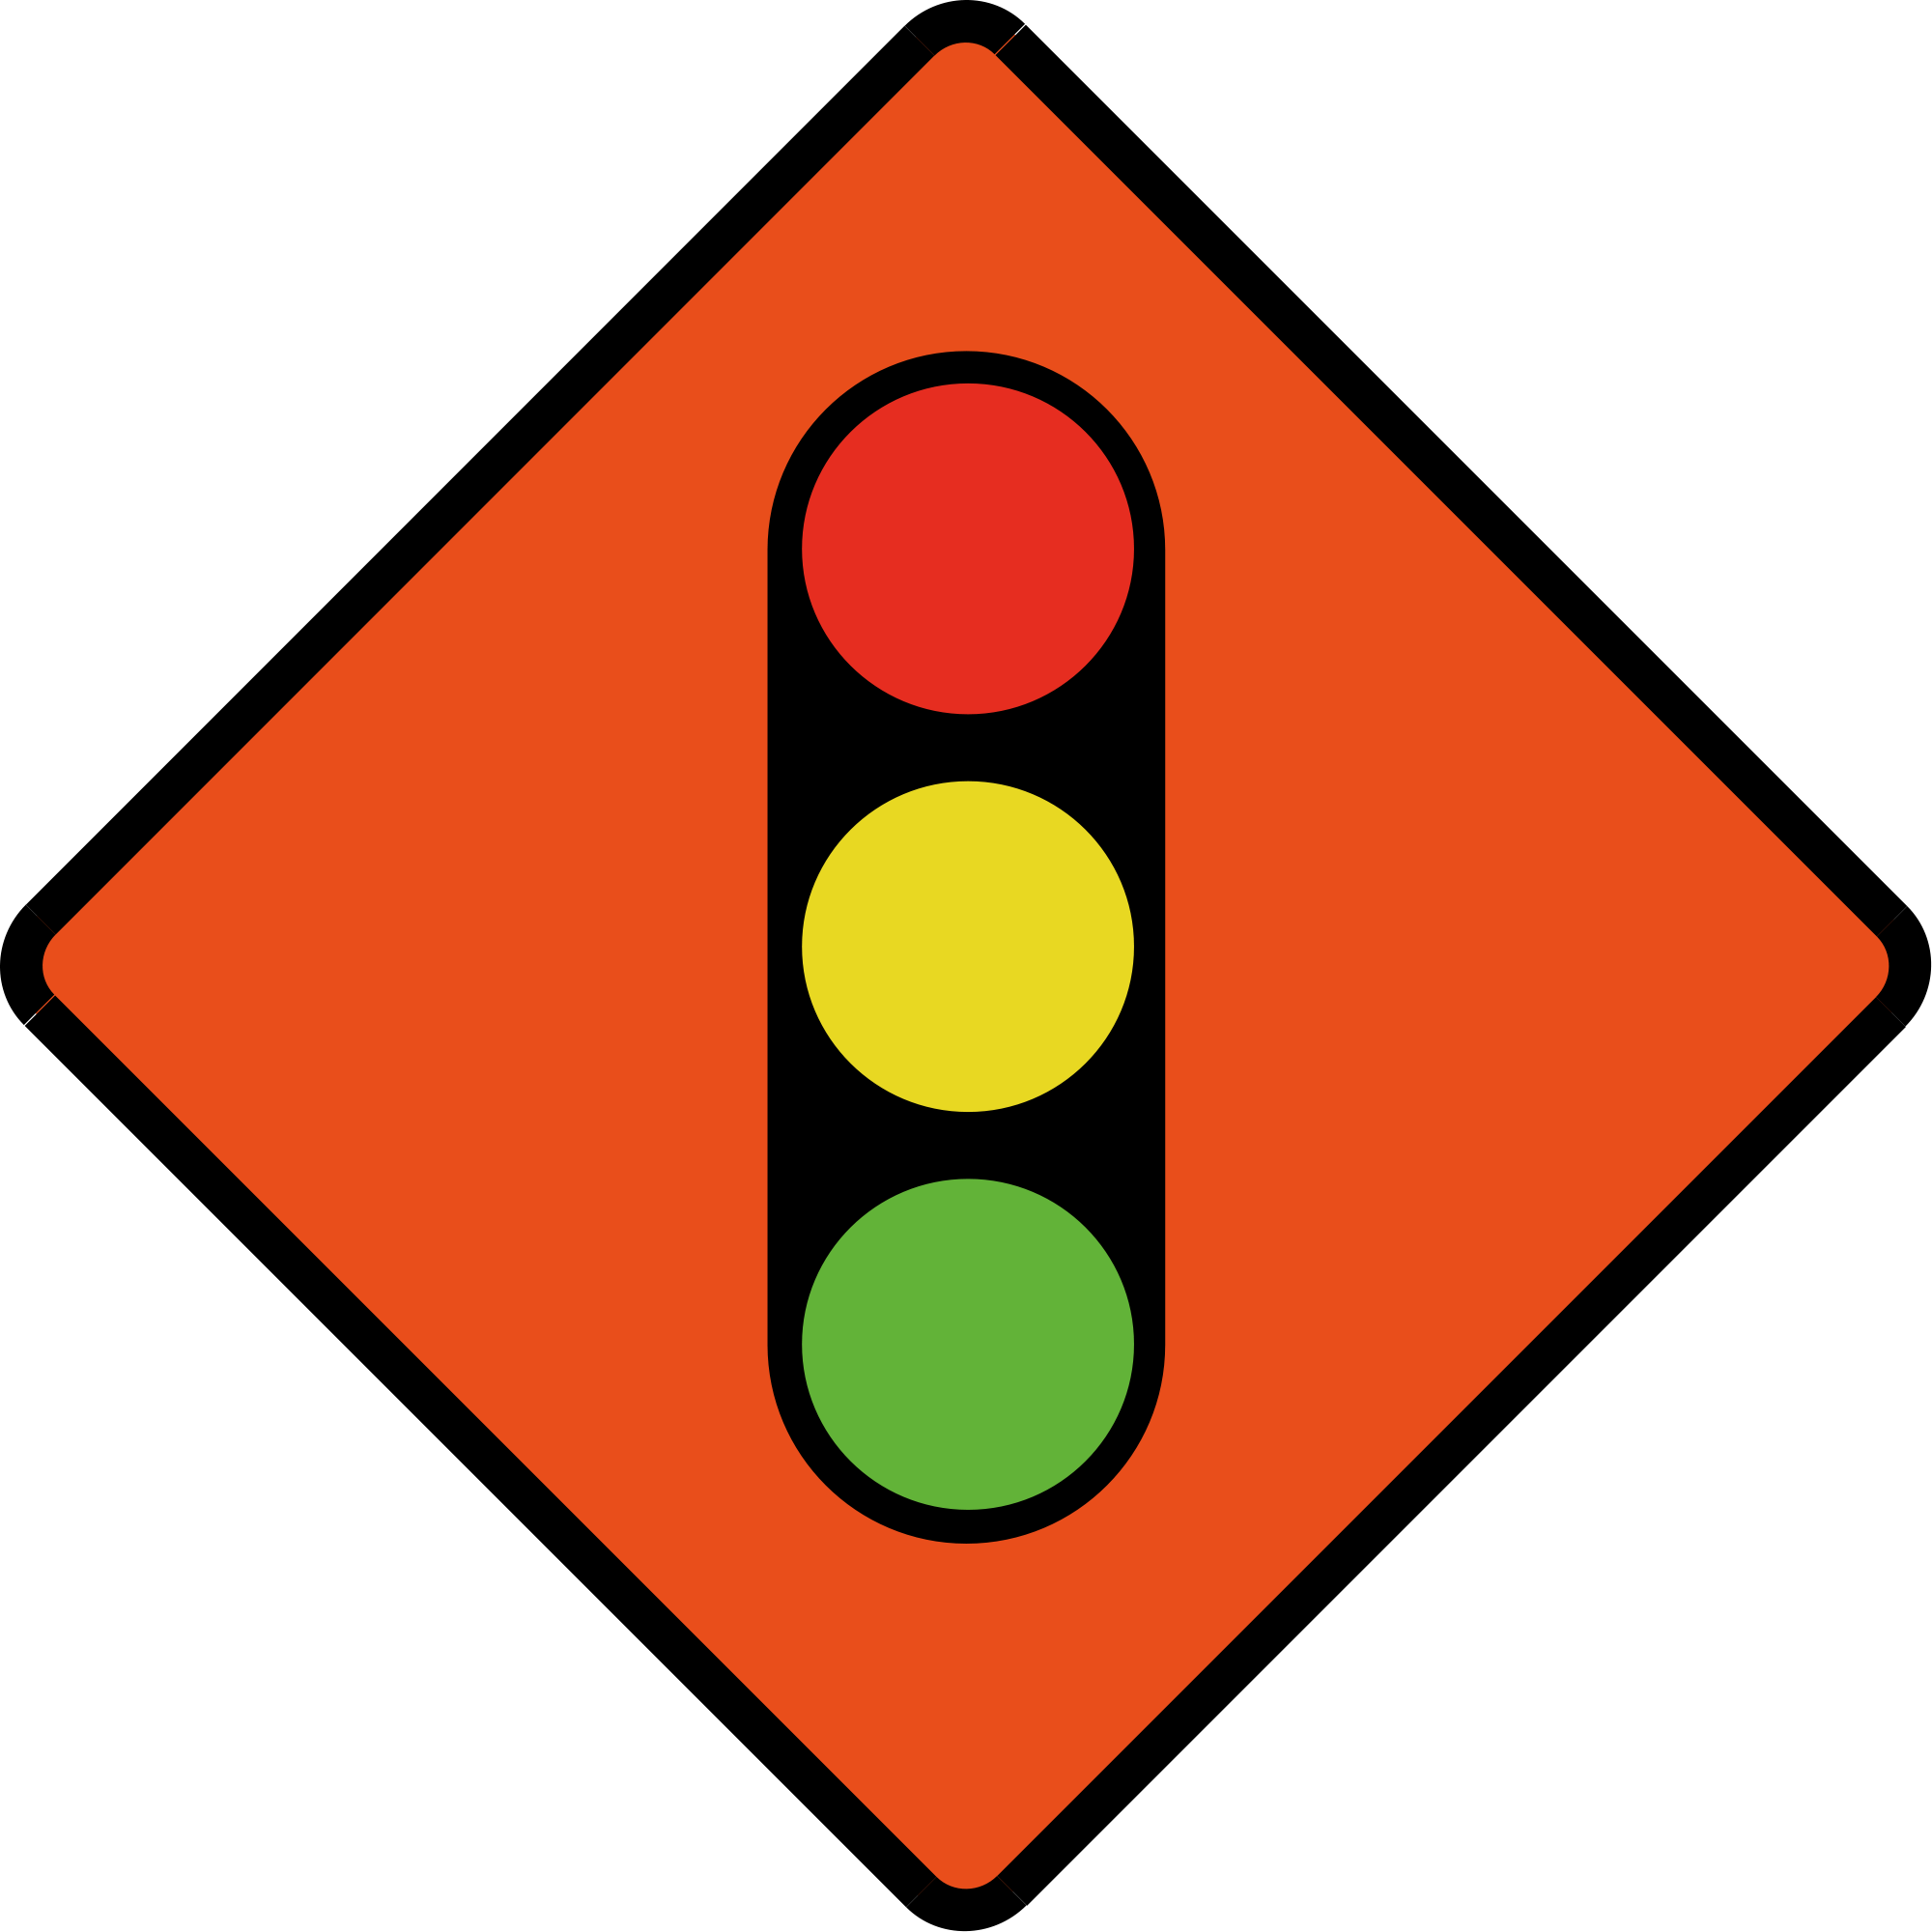 Singapore Road Signs - Traffic Signs Or Road Signs (2000x2000)